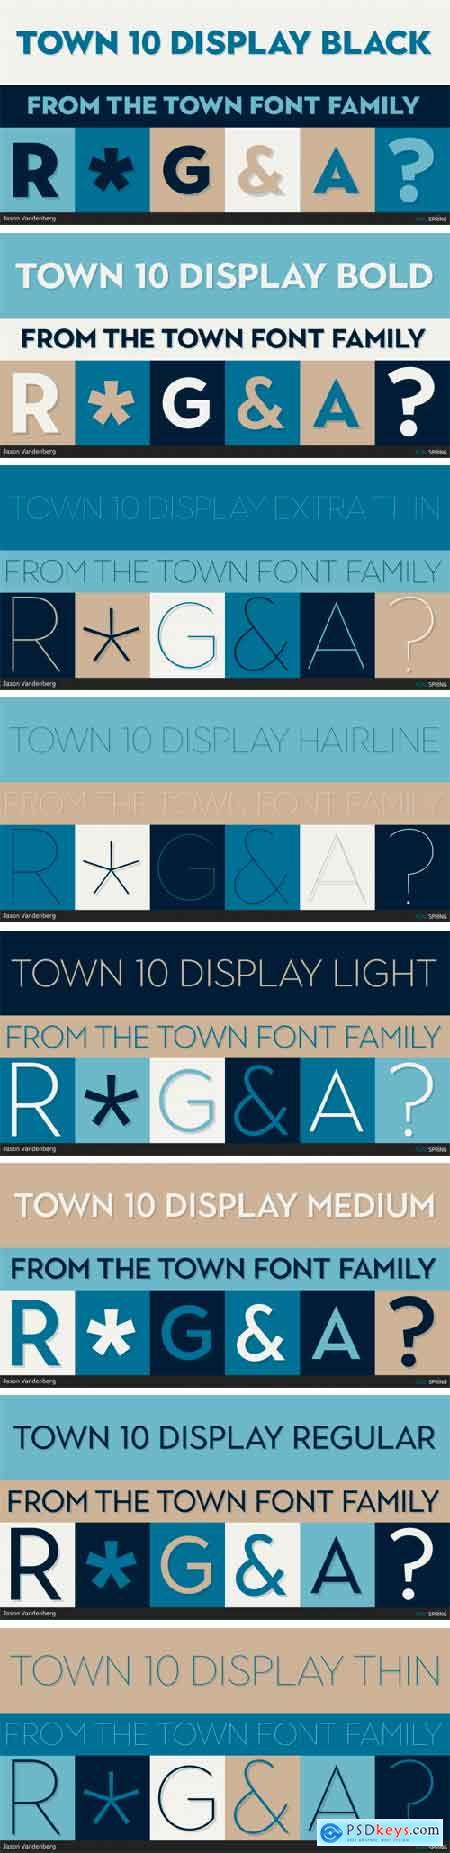 Town 10 Display Font Family